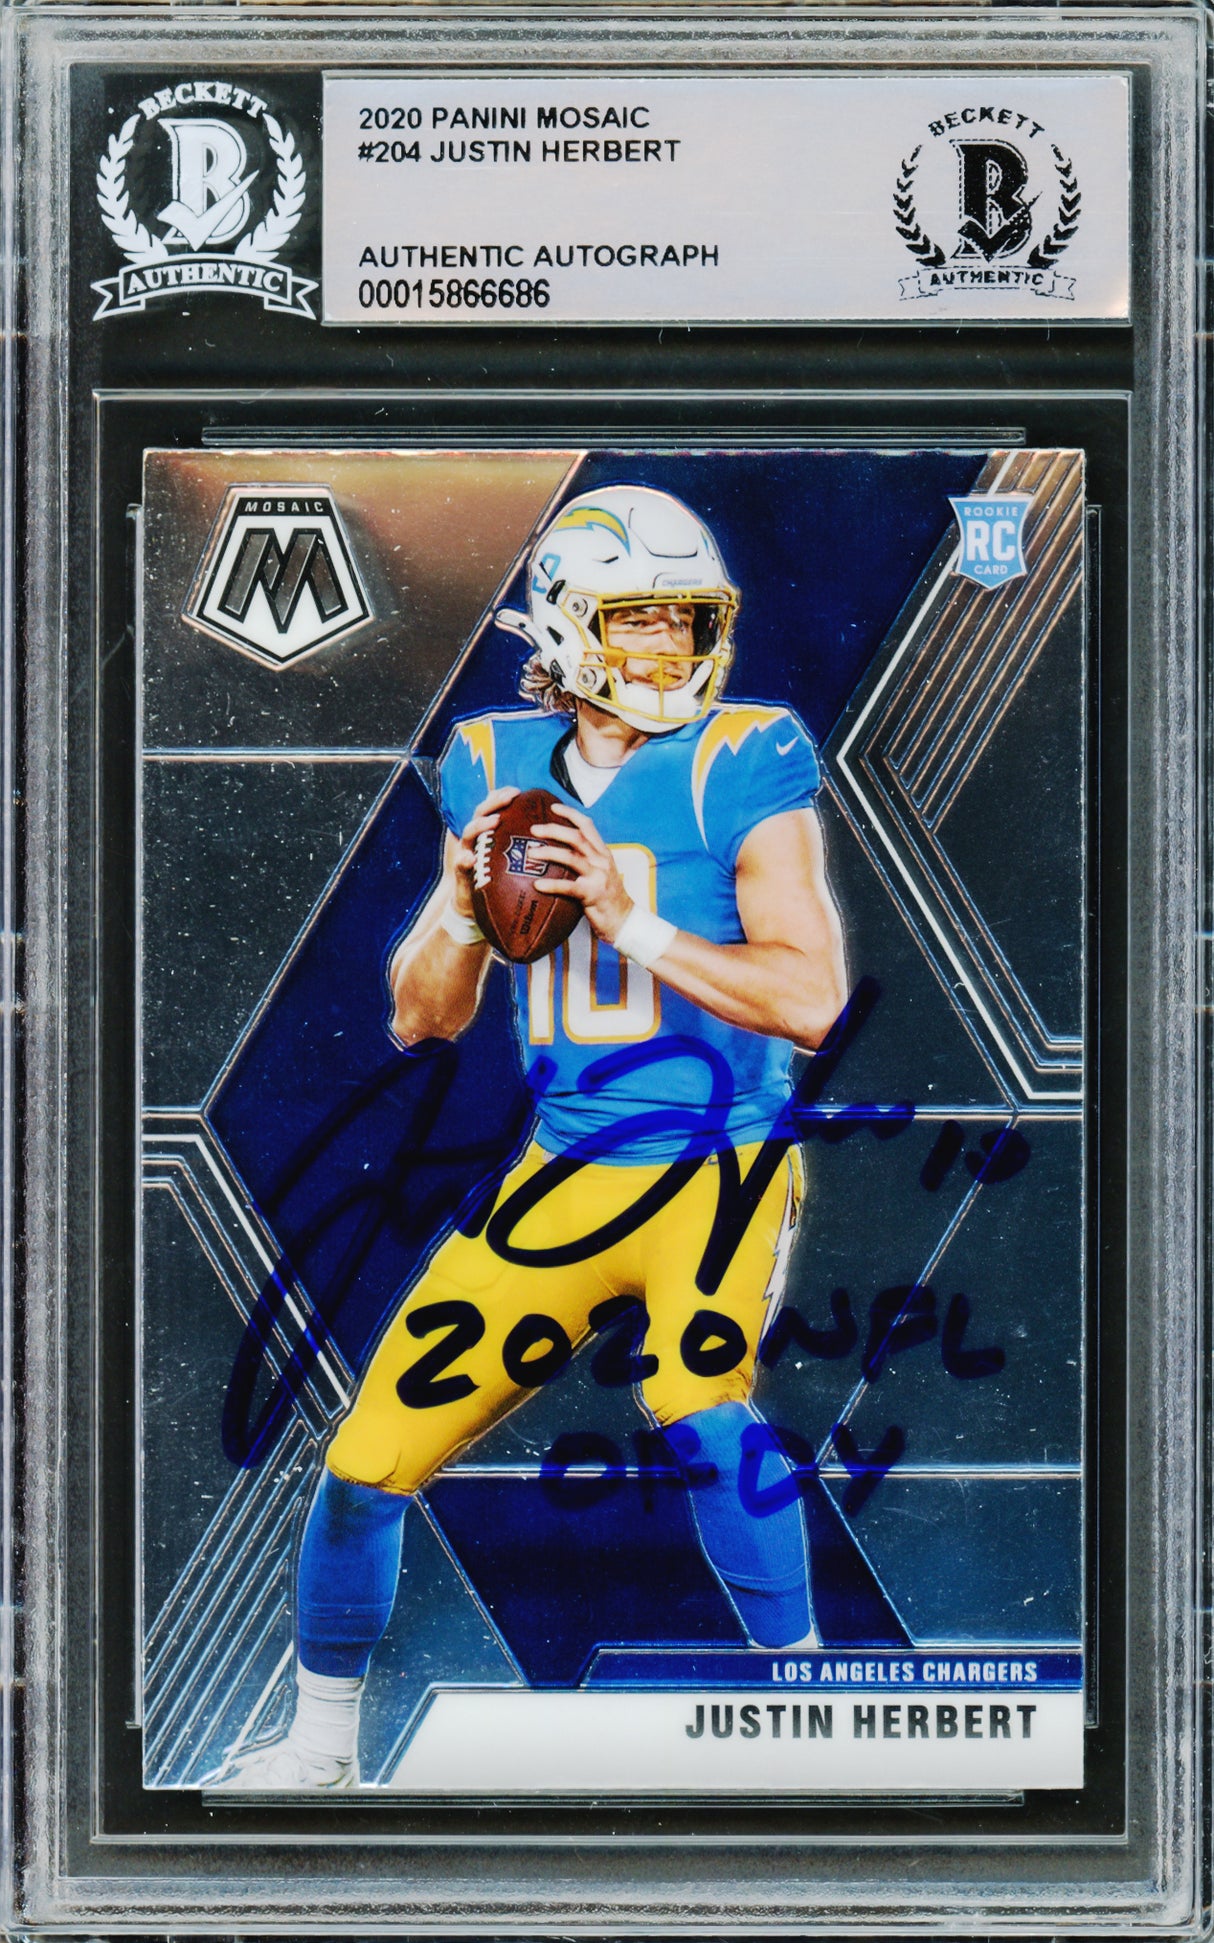 Justin Herbert Autographed 2020 Panini Mosaic Rookie Card #204 Los Angeles Chargers "2020 NFL OROY" Beckett BAS #15866686